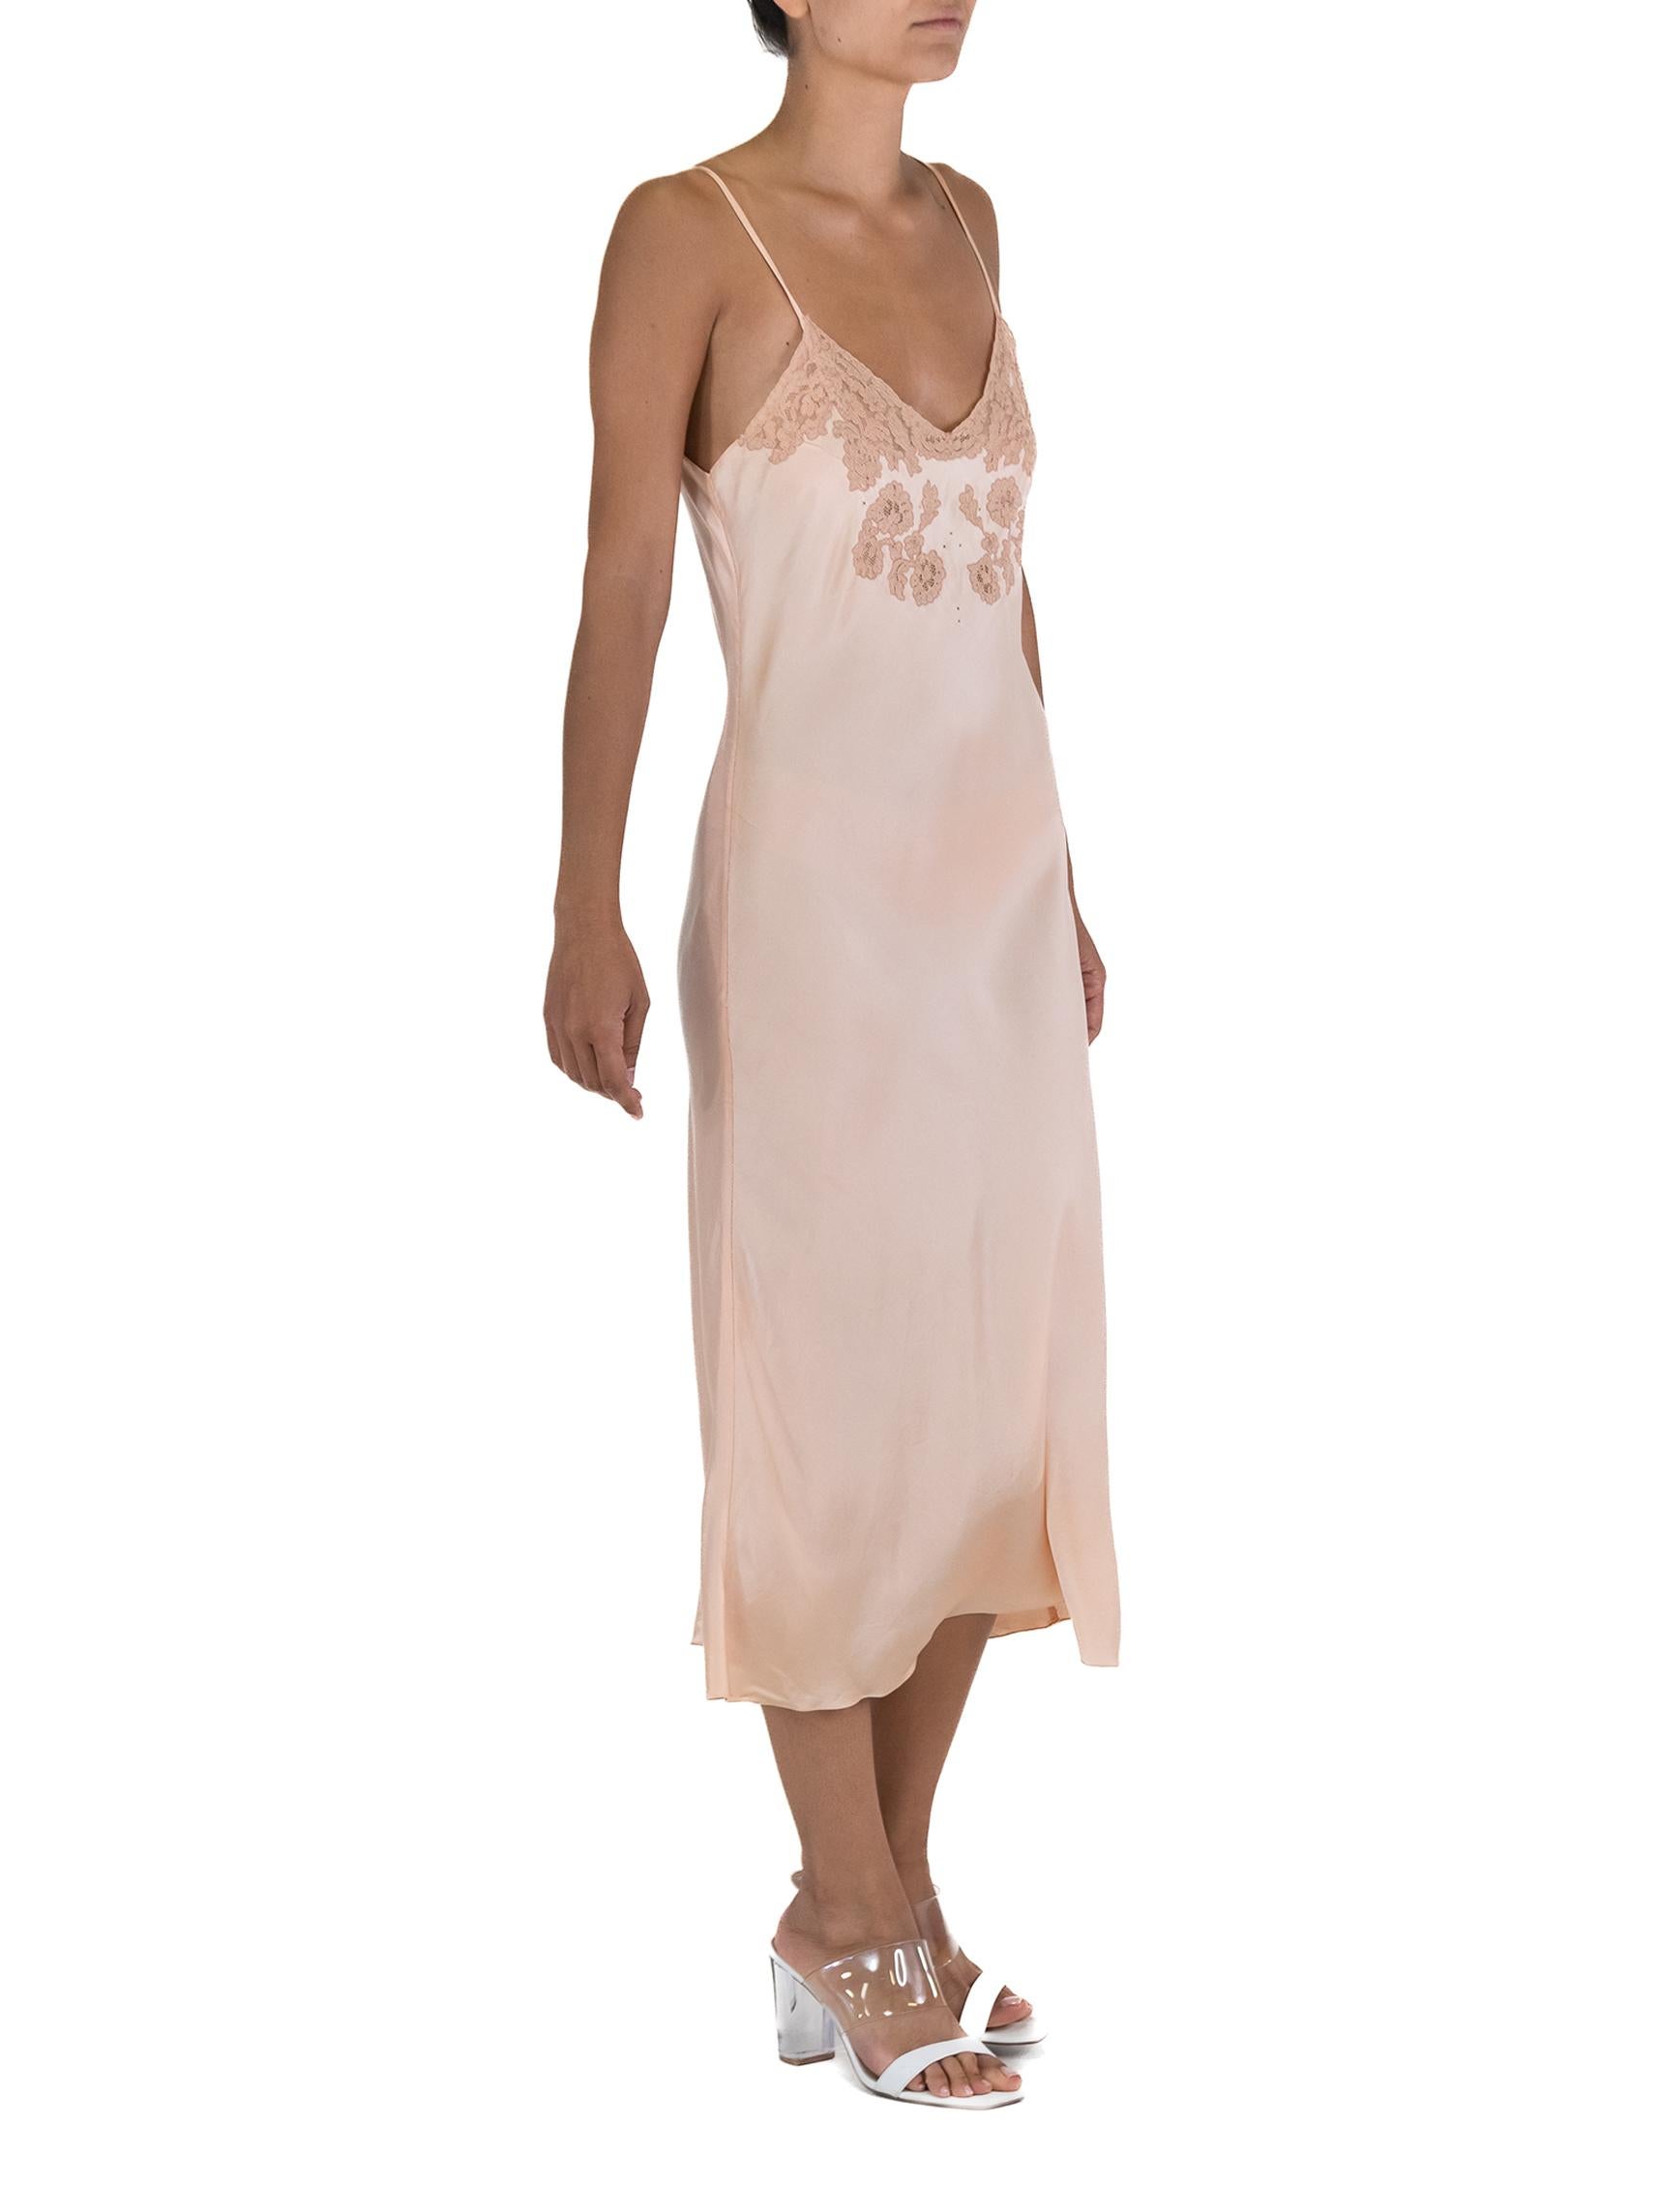 1940S Bontell Peach Silk Slip All Handmade With Lace Detail In Excellent Condition For Sale In New York, NY